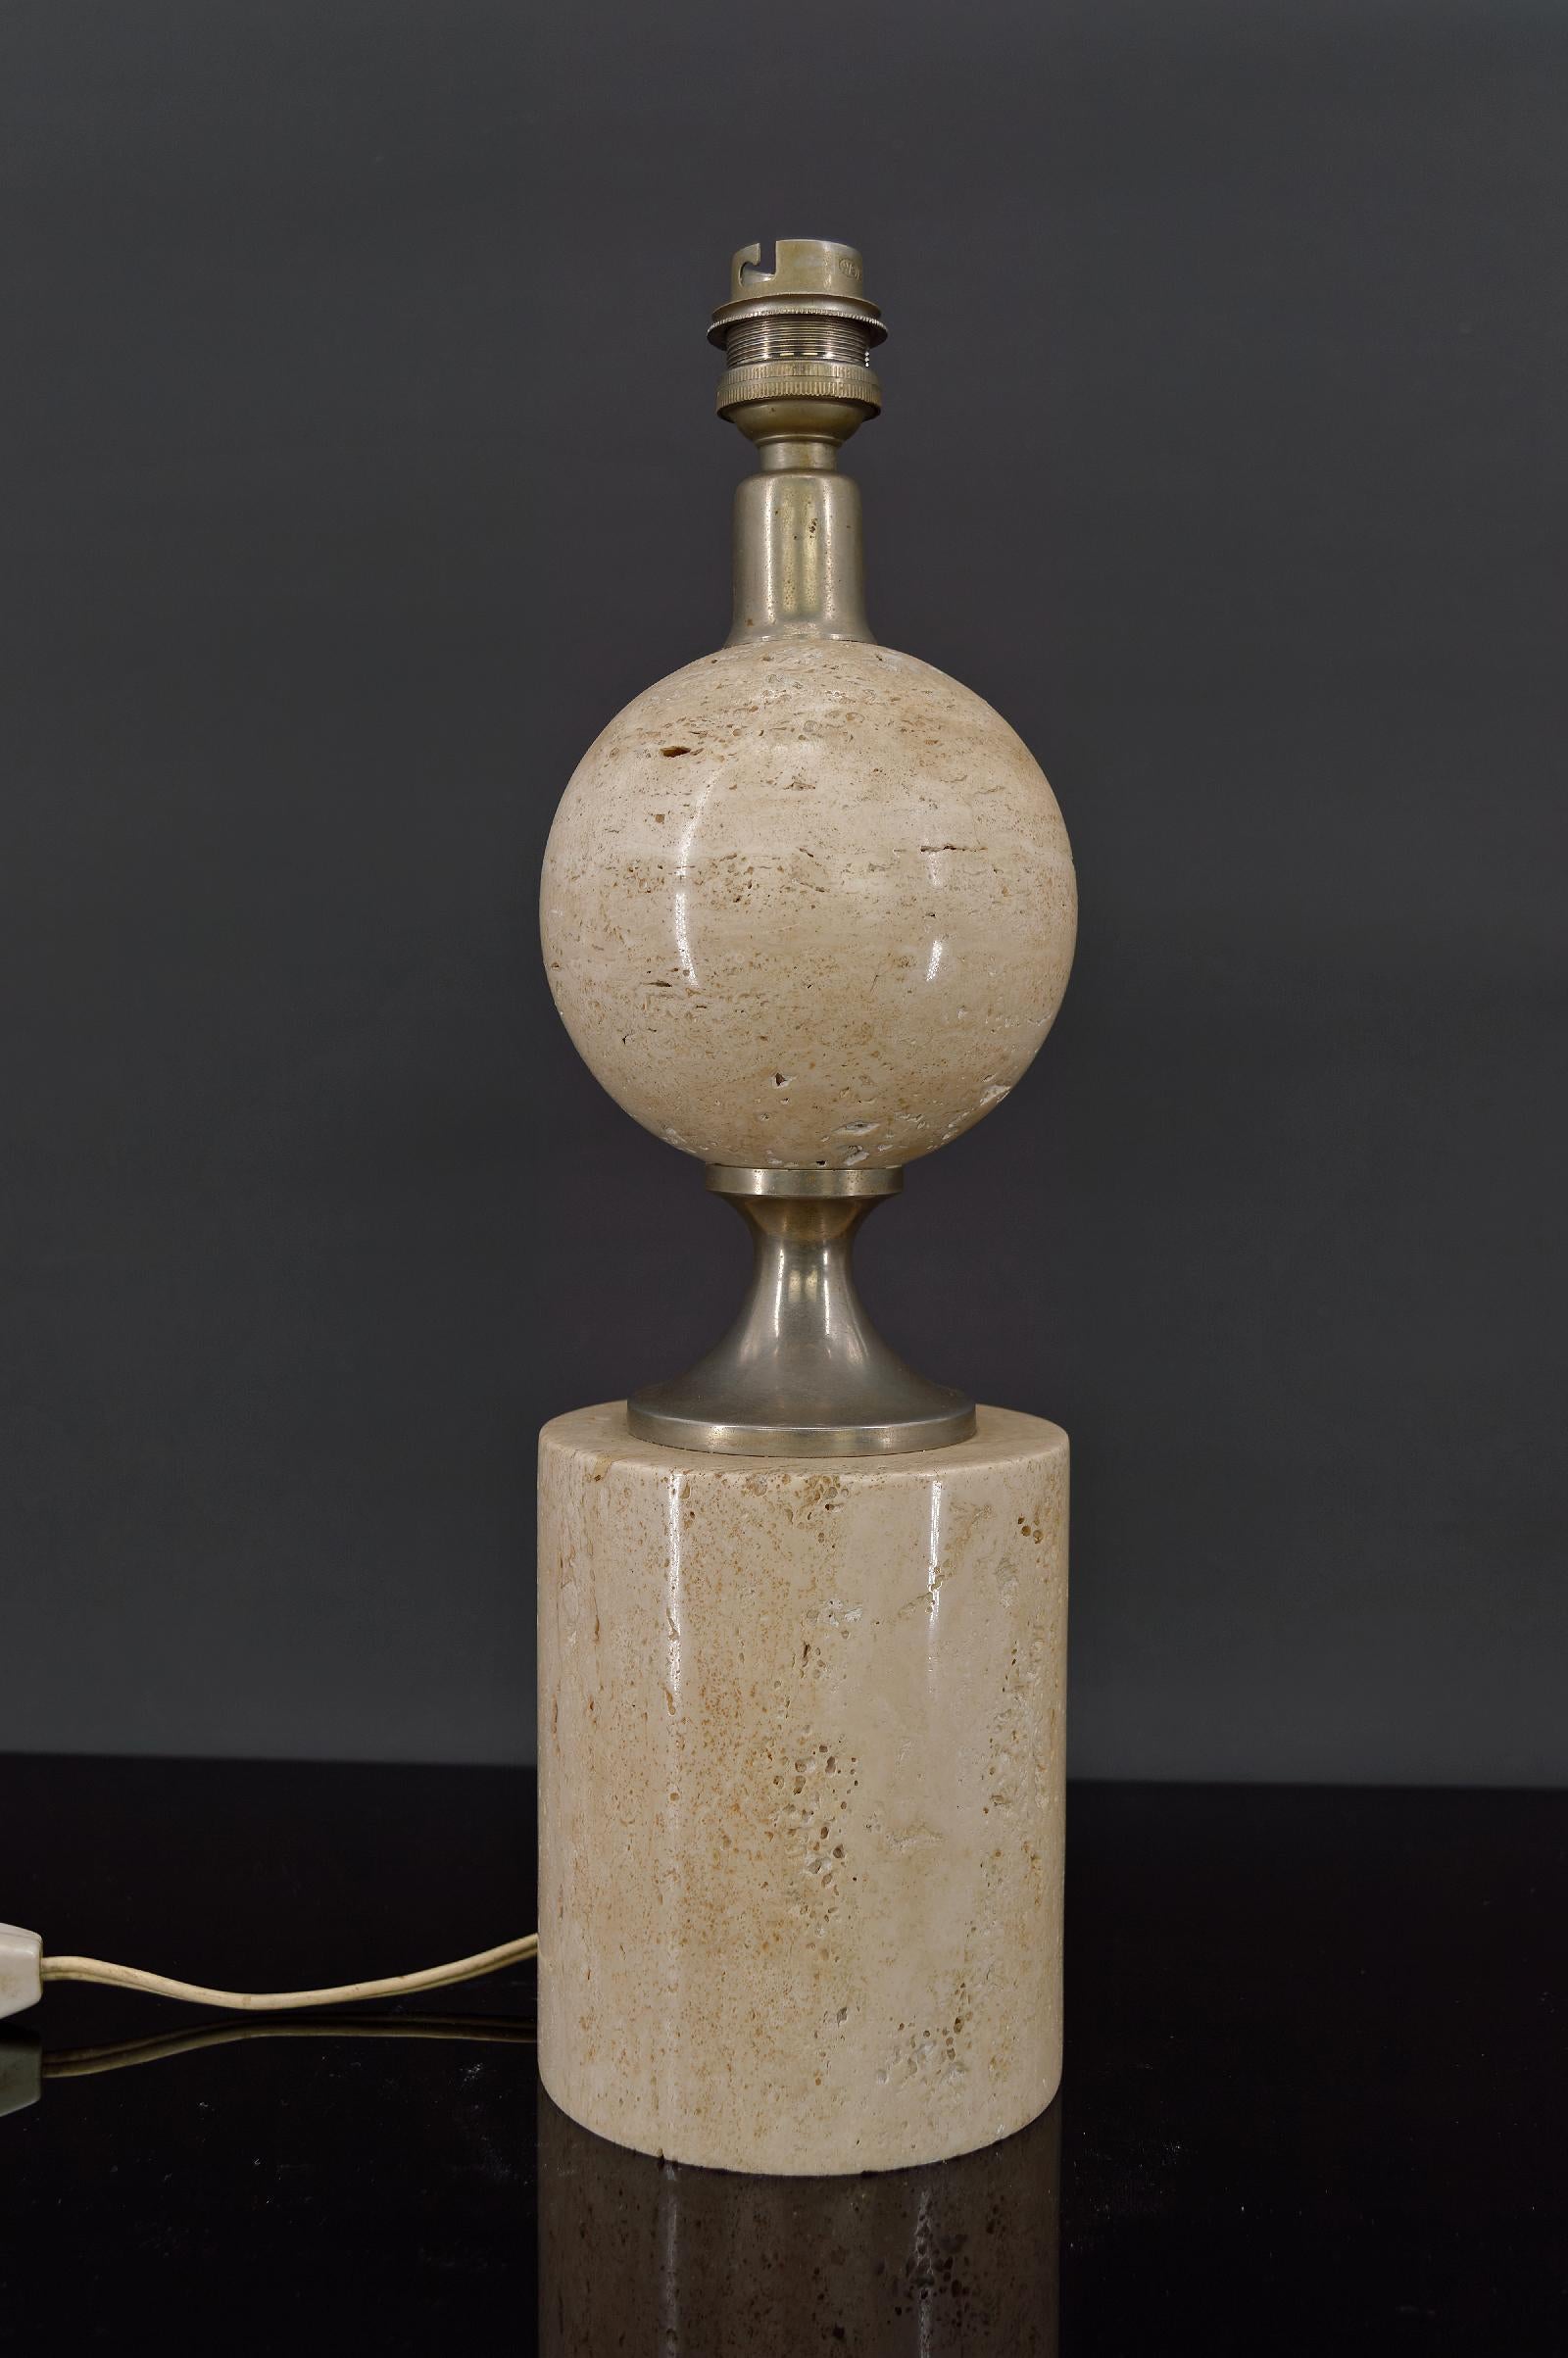 Elegant table / living room lamp composed of two travertine sculptures: one spherical and the other cylindrical.

Art Deco Moderniste / Mid-Century Modern style, France, 1960s-1970s.
By Philippe Barbier, French designer known for his work in